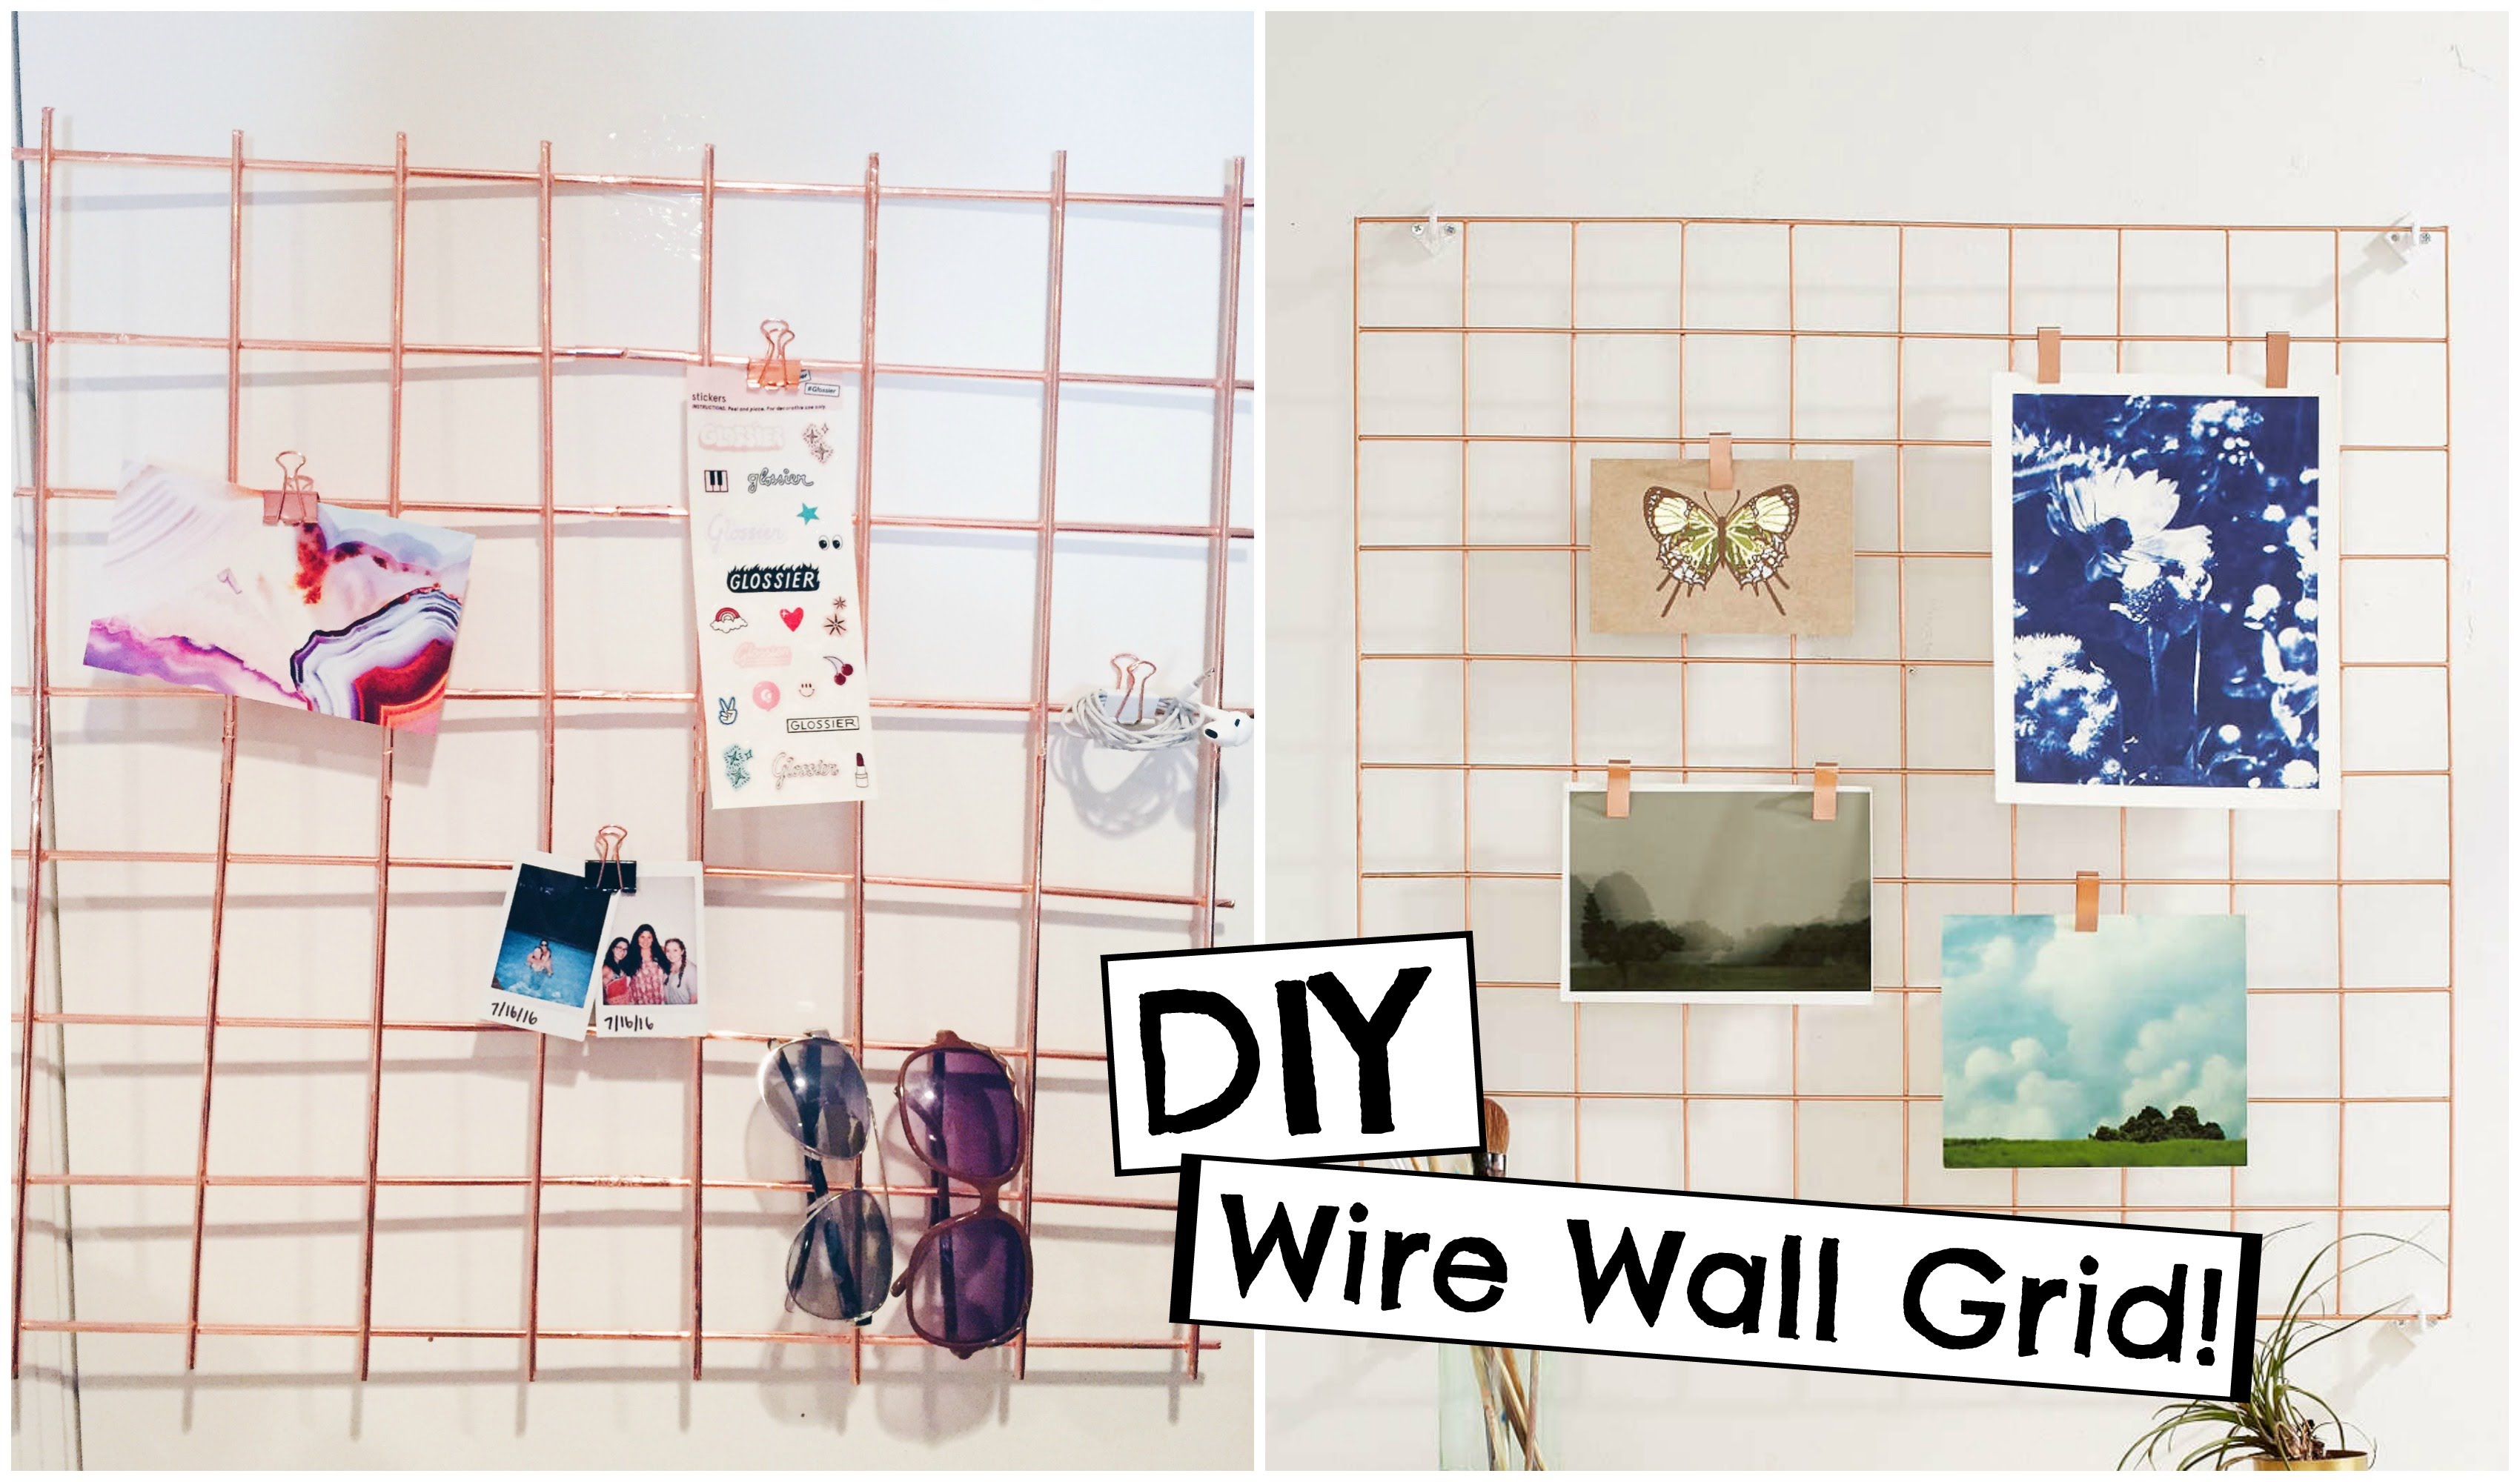 DIY Urban Outfitters Inspired Copper Wire Wall Grid | Back to School ...